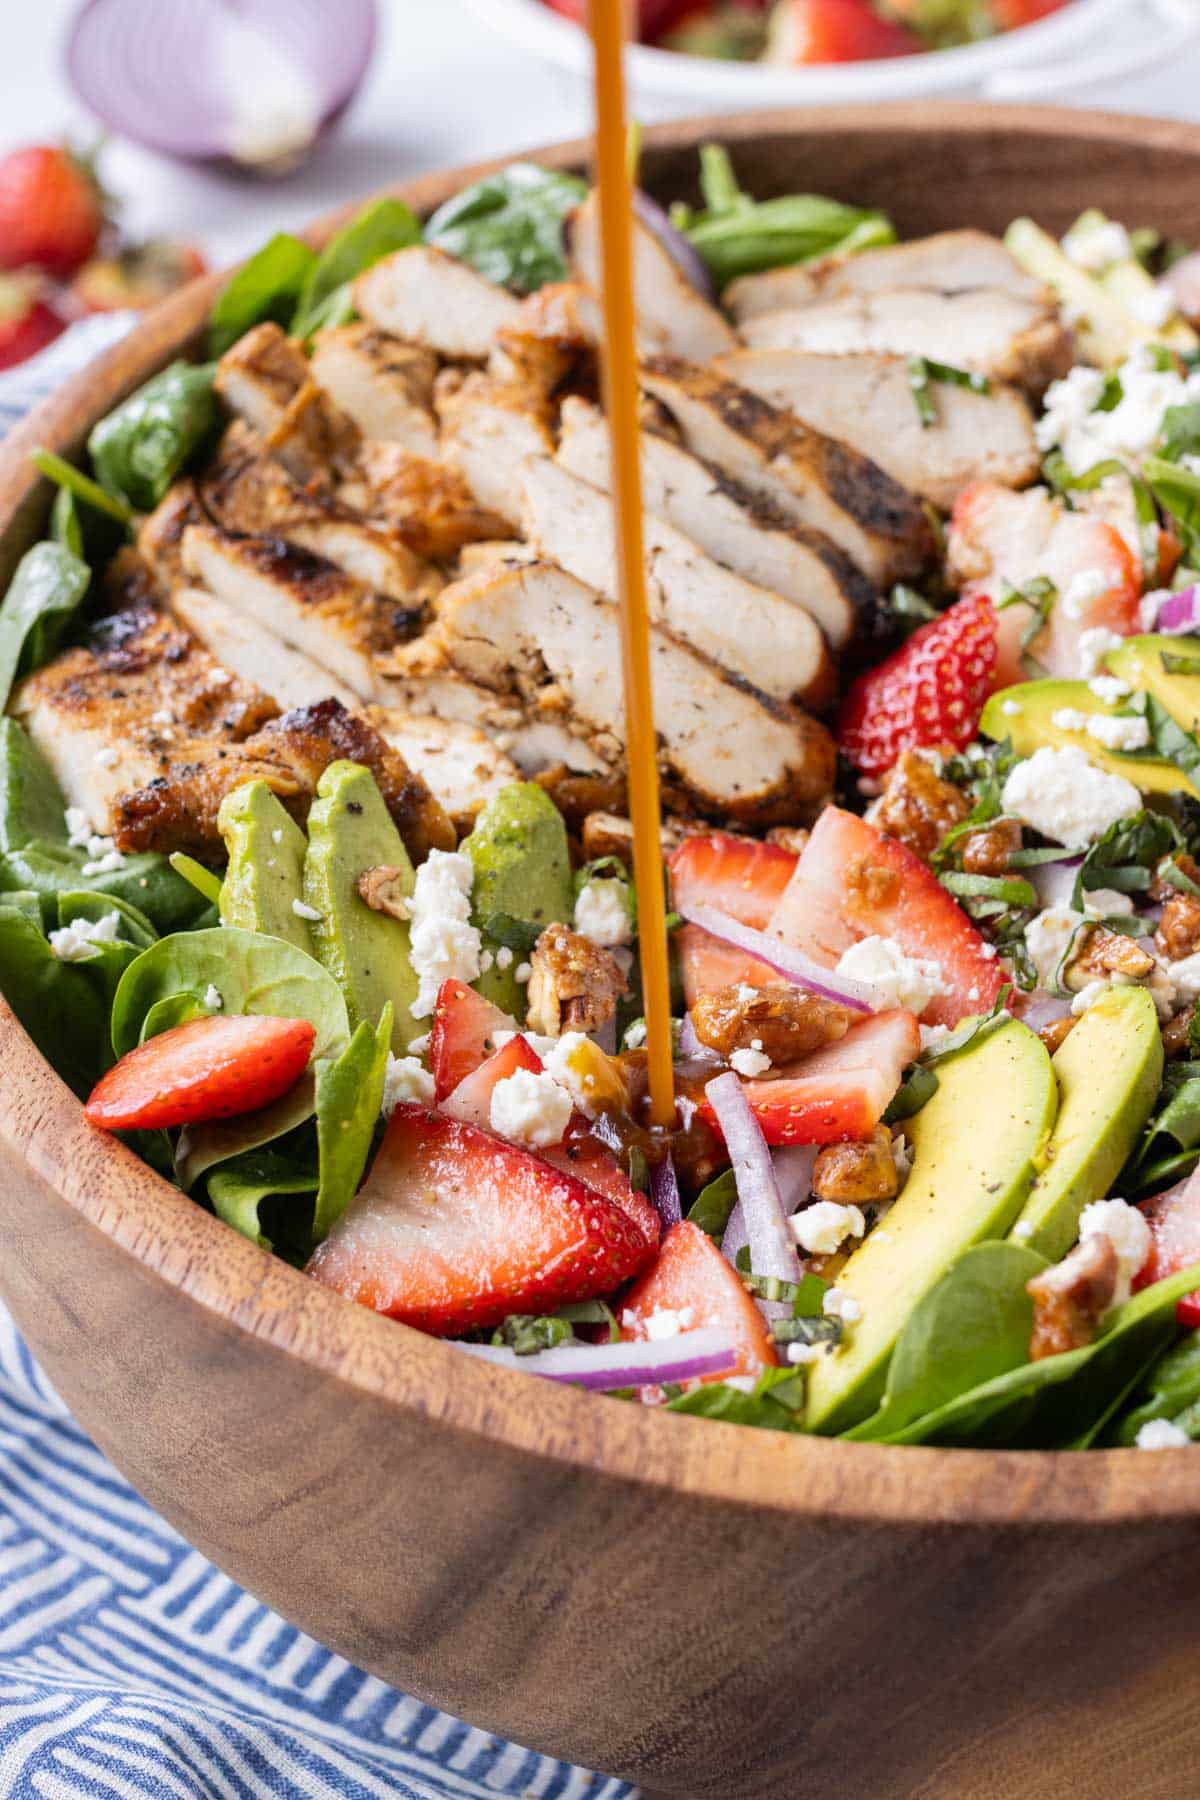 Balsamic dressing is poured over a strawberry spinach salad with grilled chicken.